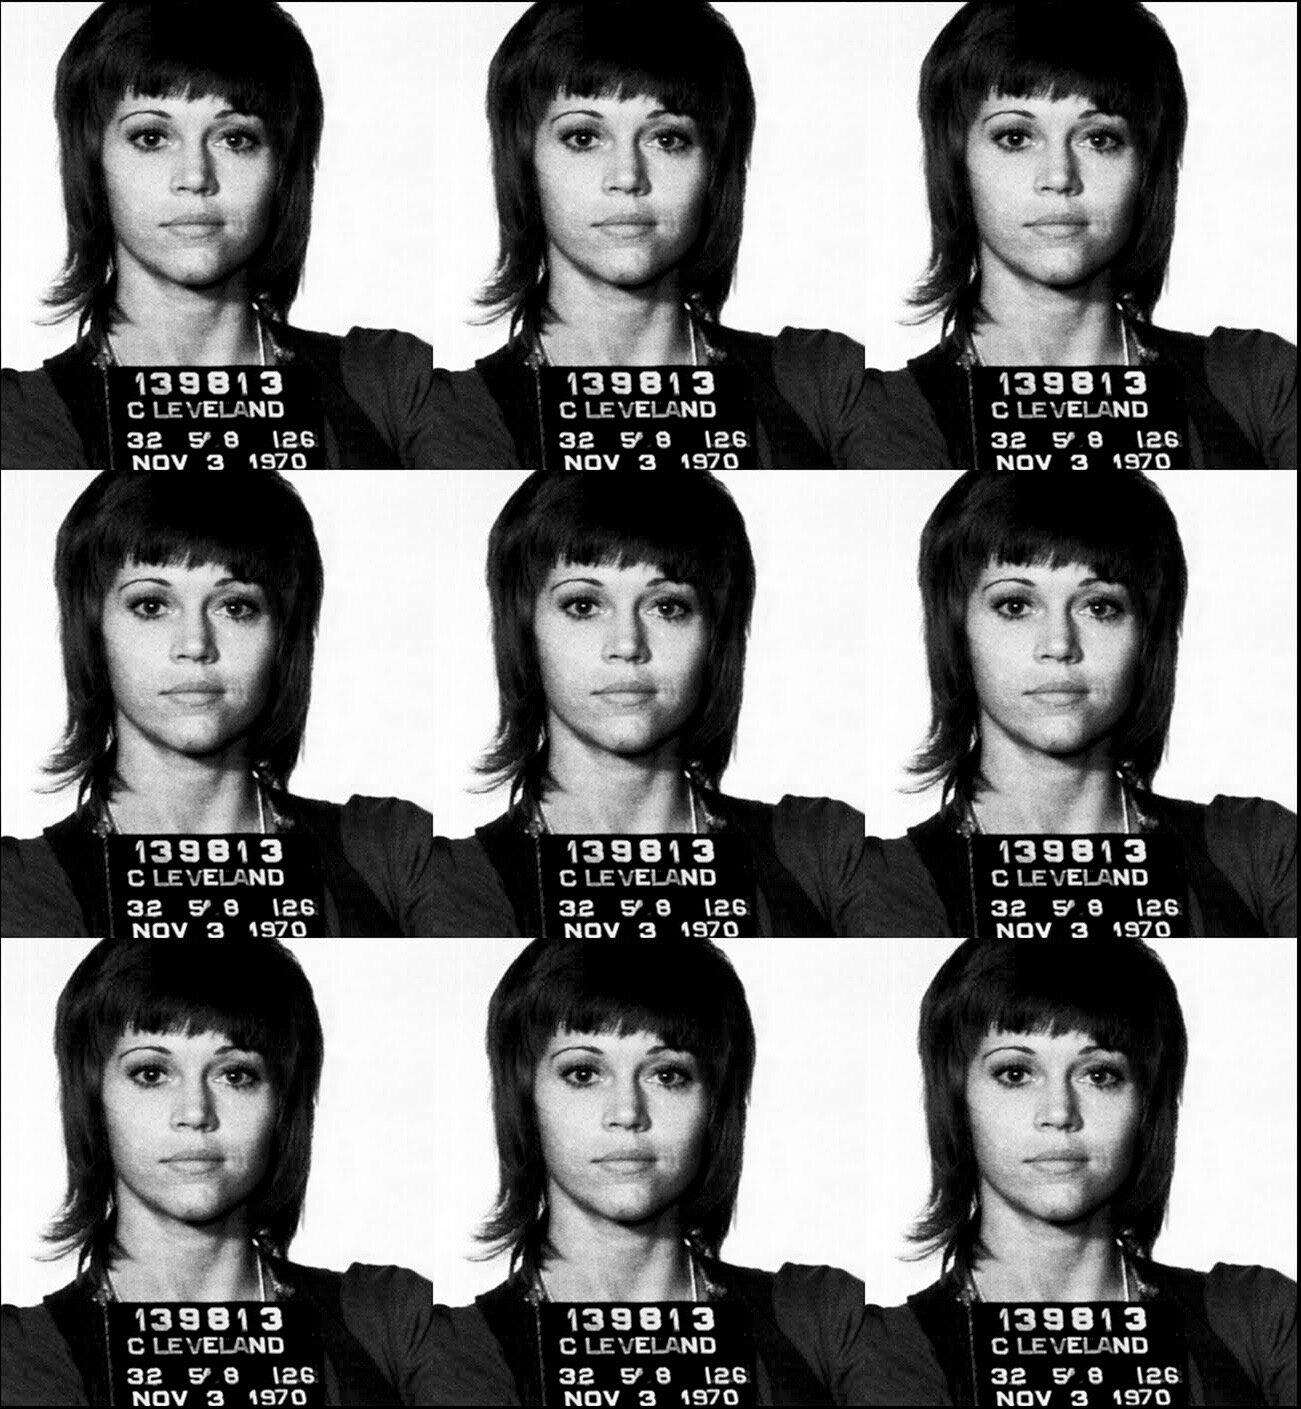 "Jane Fonda Mugshot" Print 39 x 36 inch Edition of 75 by Gerard Marti

Digital print on fine art paper. 
Ships rolled in a tube. 
Signed and numbered by the artist. 

Jane Fonda was arrested in November 1970 for allegedly trying to smuggle a large